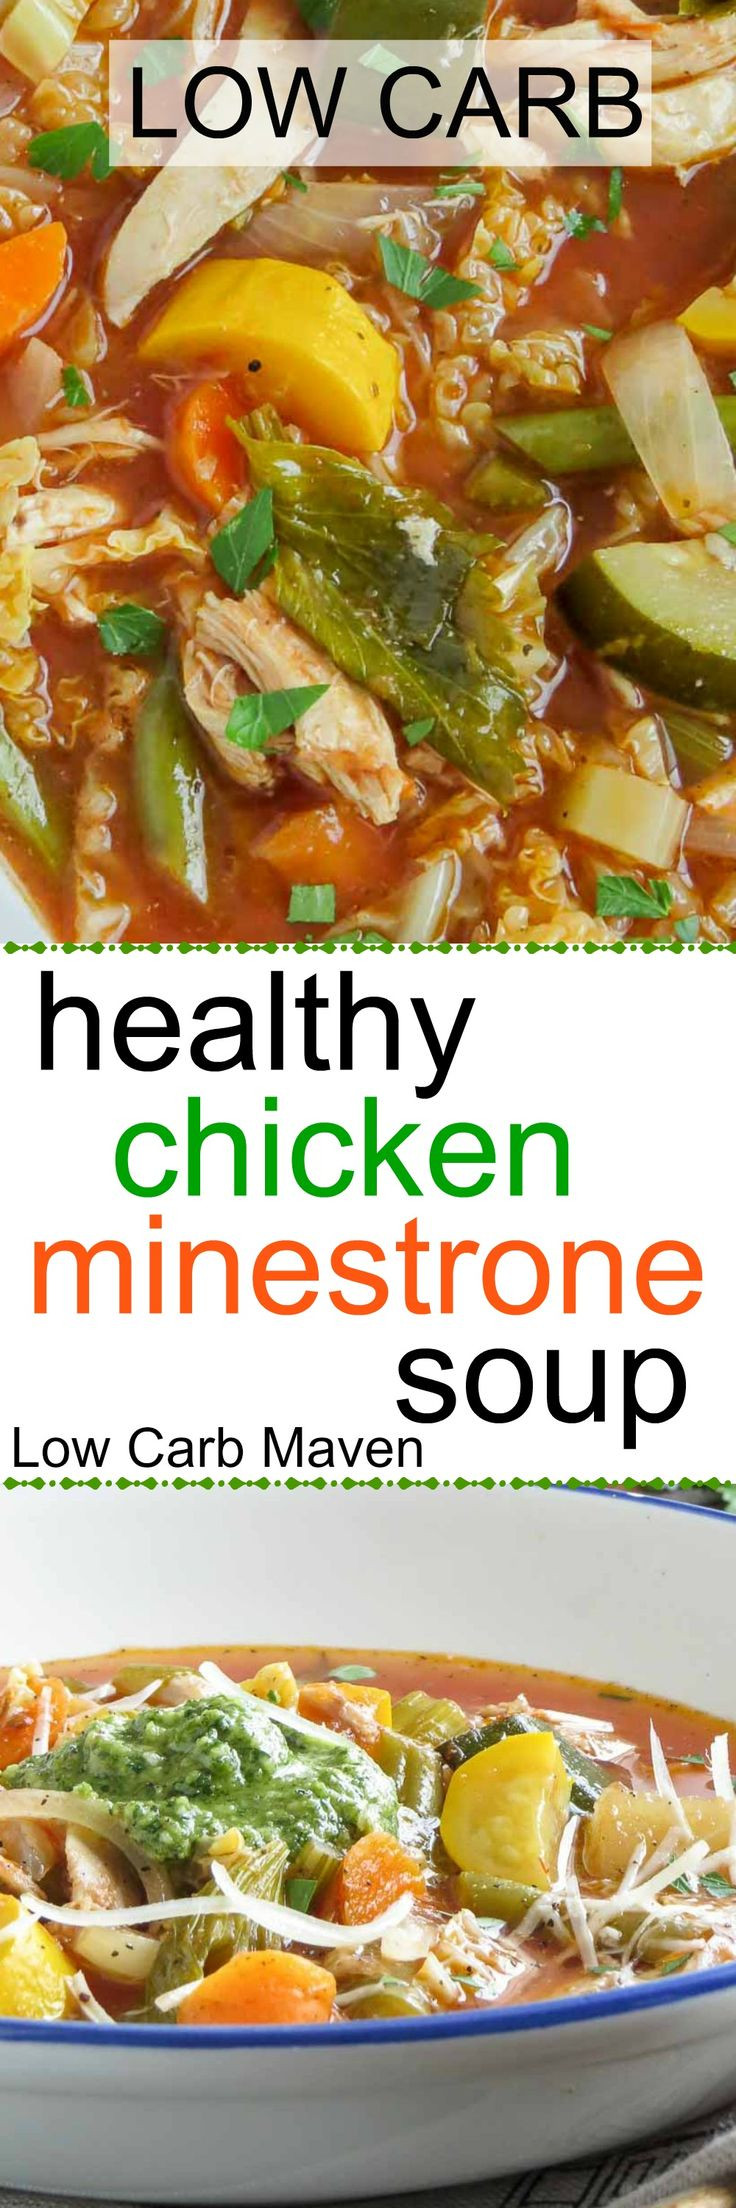 Healthy Low Carb Soups
 This healthy low carb minestrone soup makes a great low